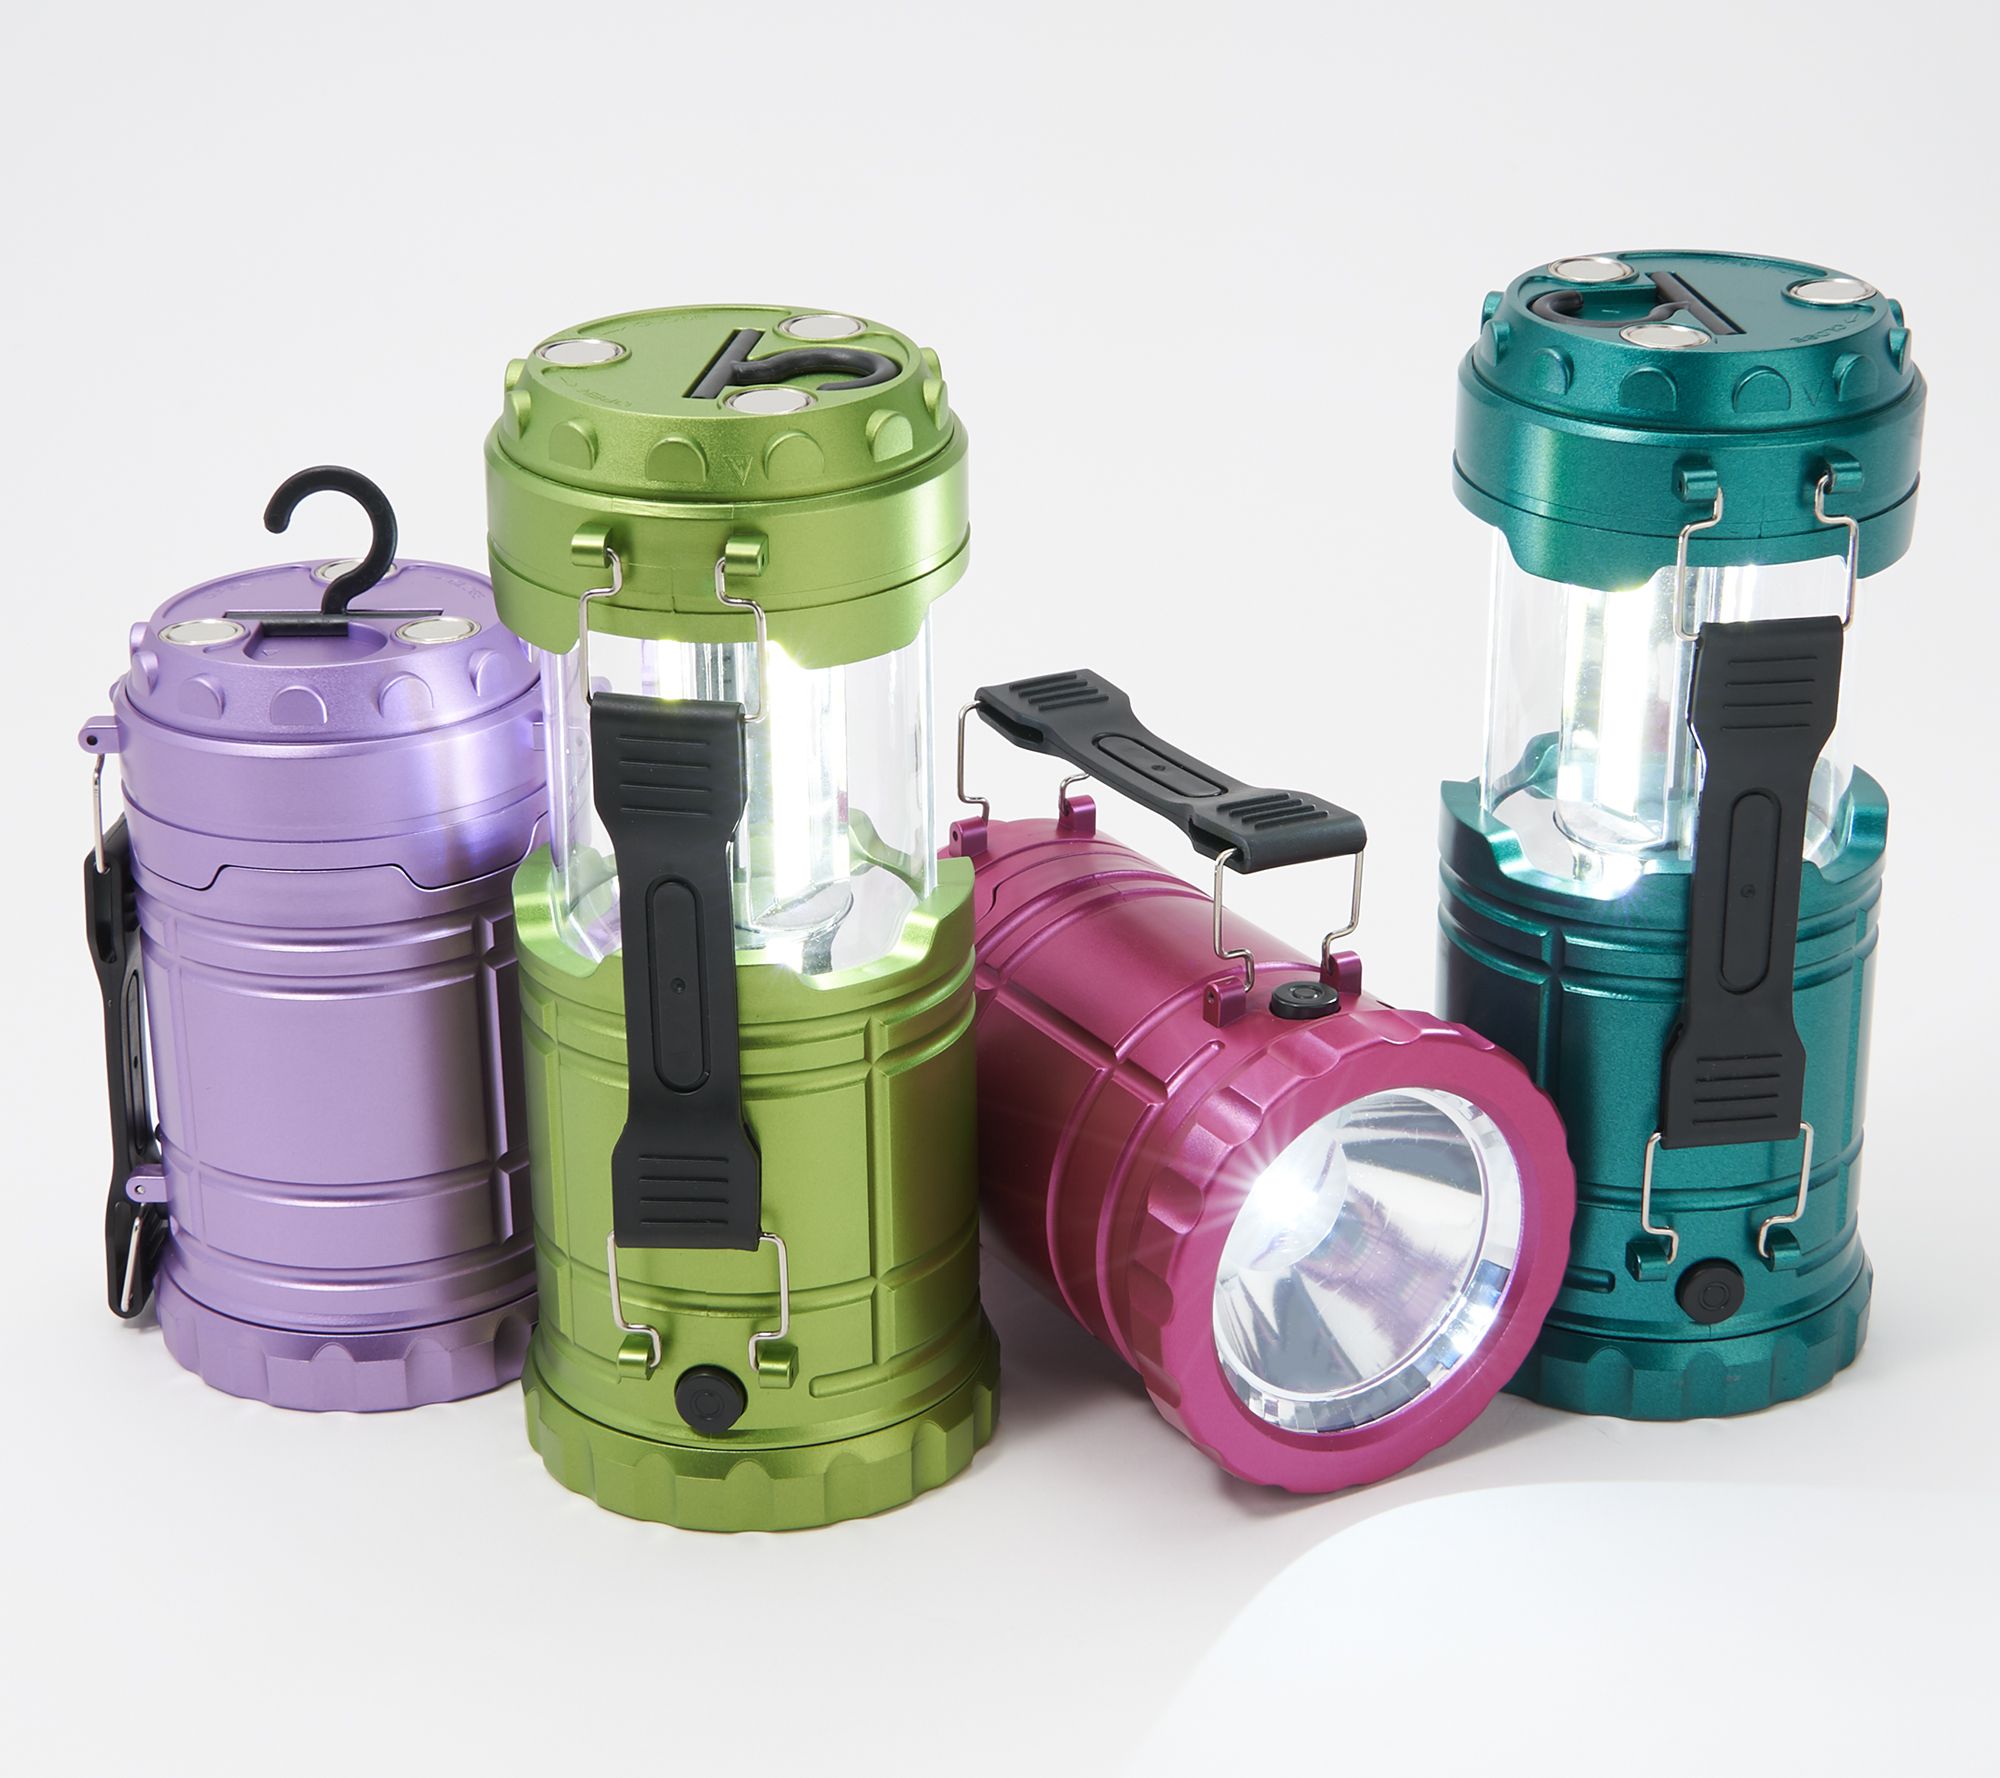 BrightEase Lantern with Removeable Flashlights 